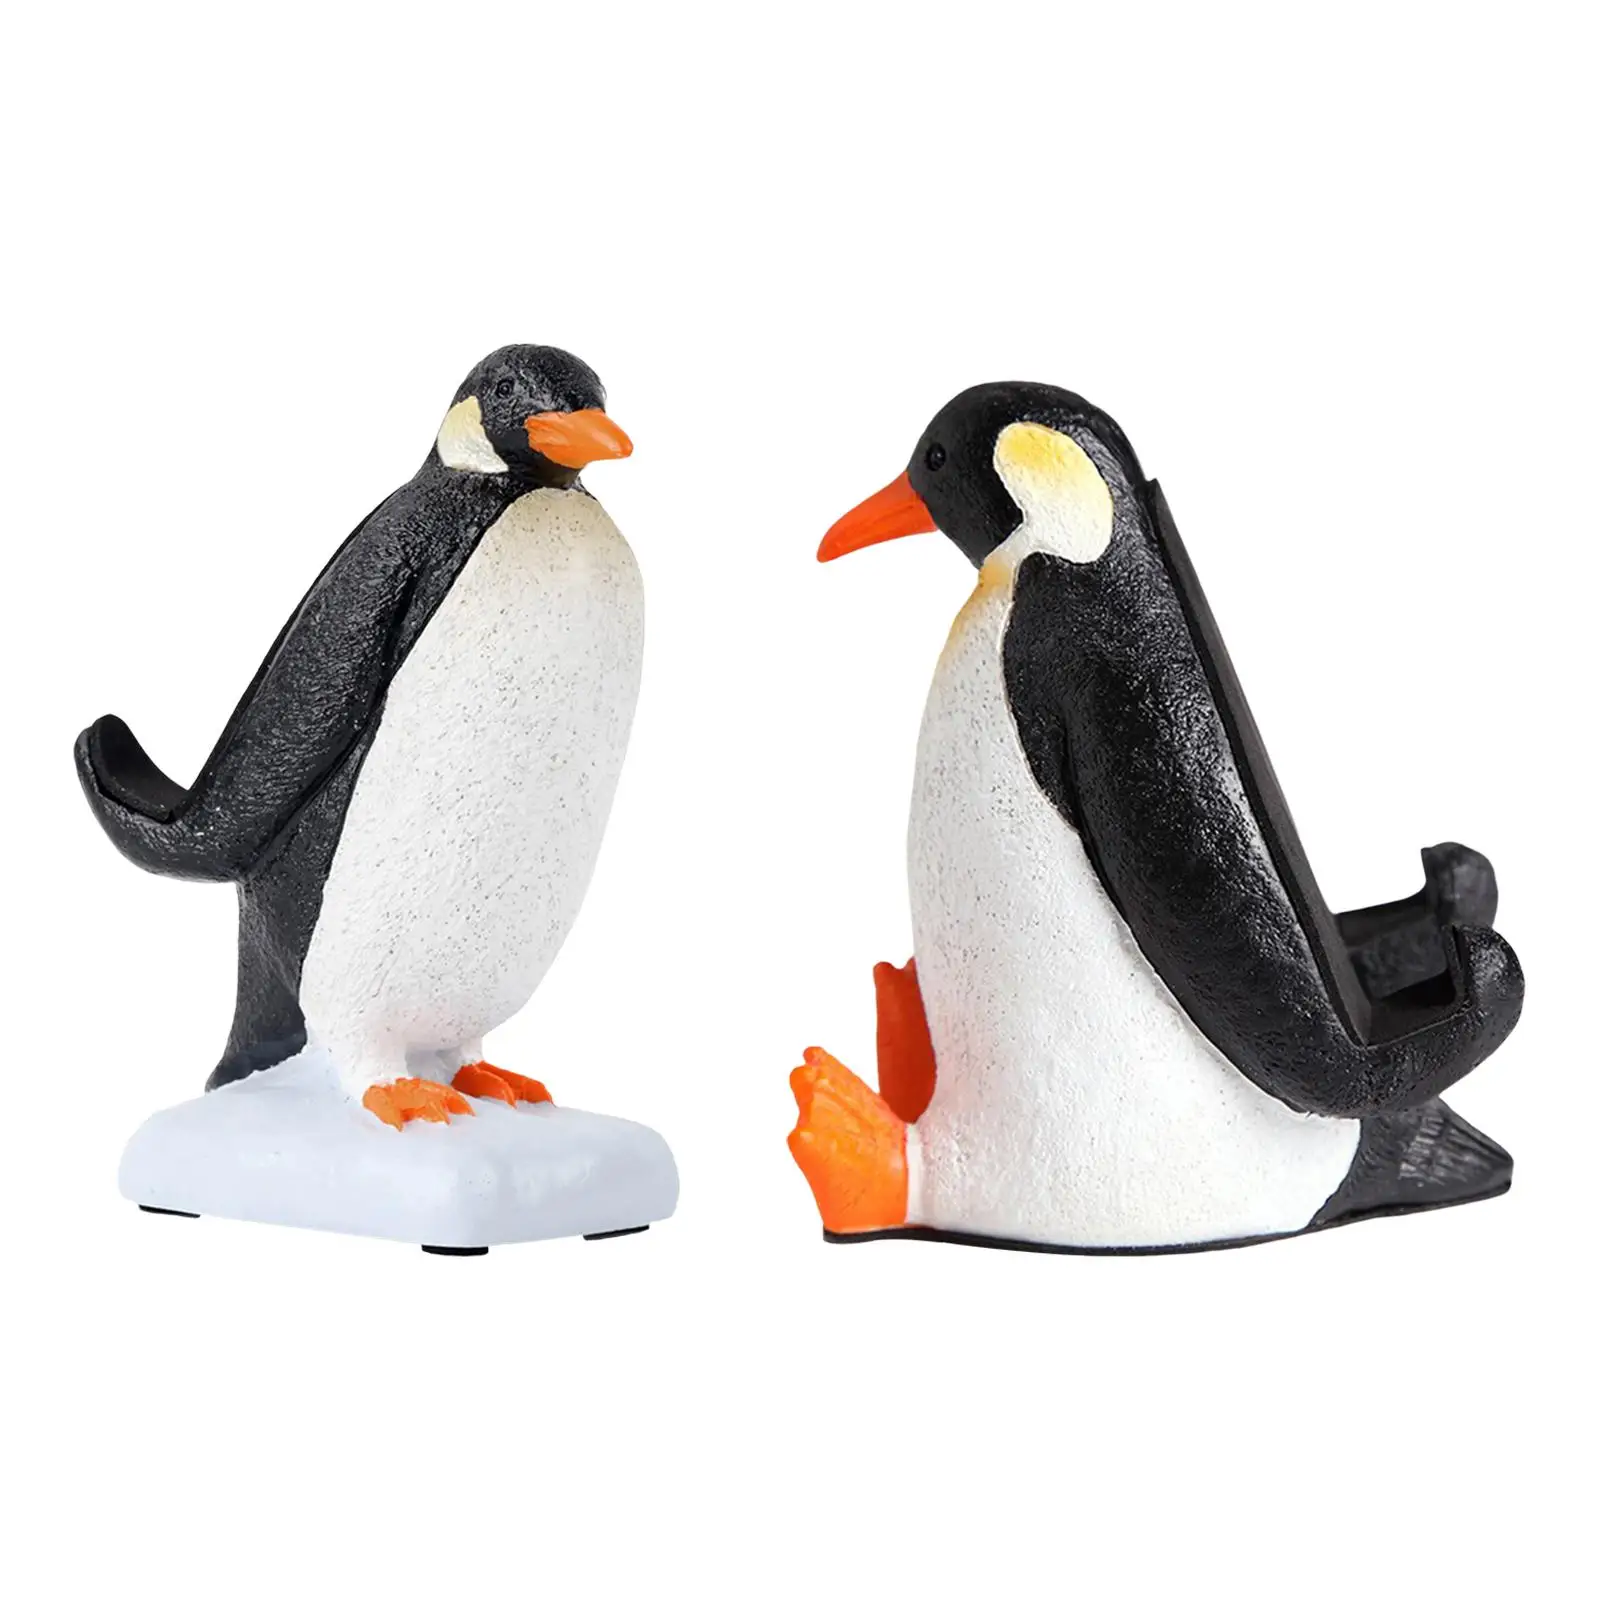 

Creative Animal Penguin Statue Desktop Phone Holder Stand Support Cradle Crafts Ornaments Decoration for Office Tabletop Home